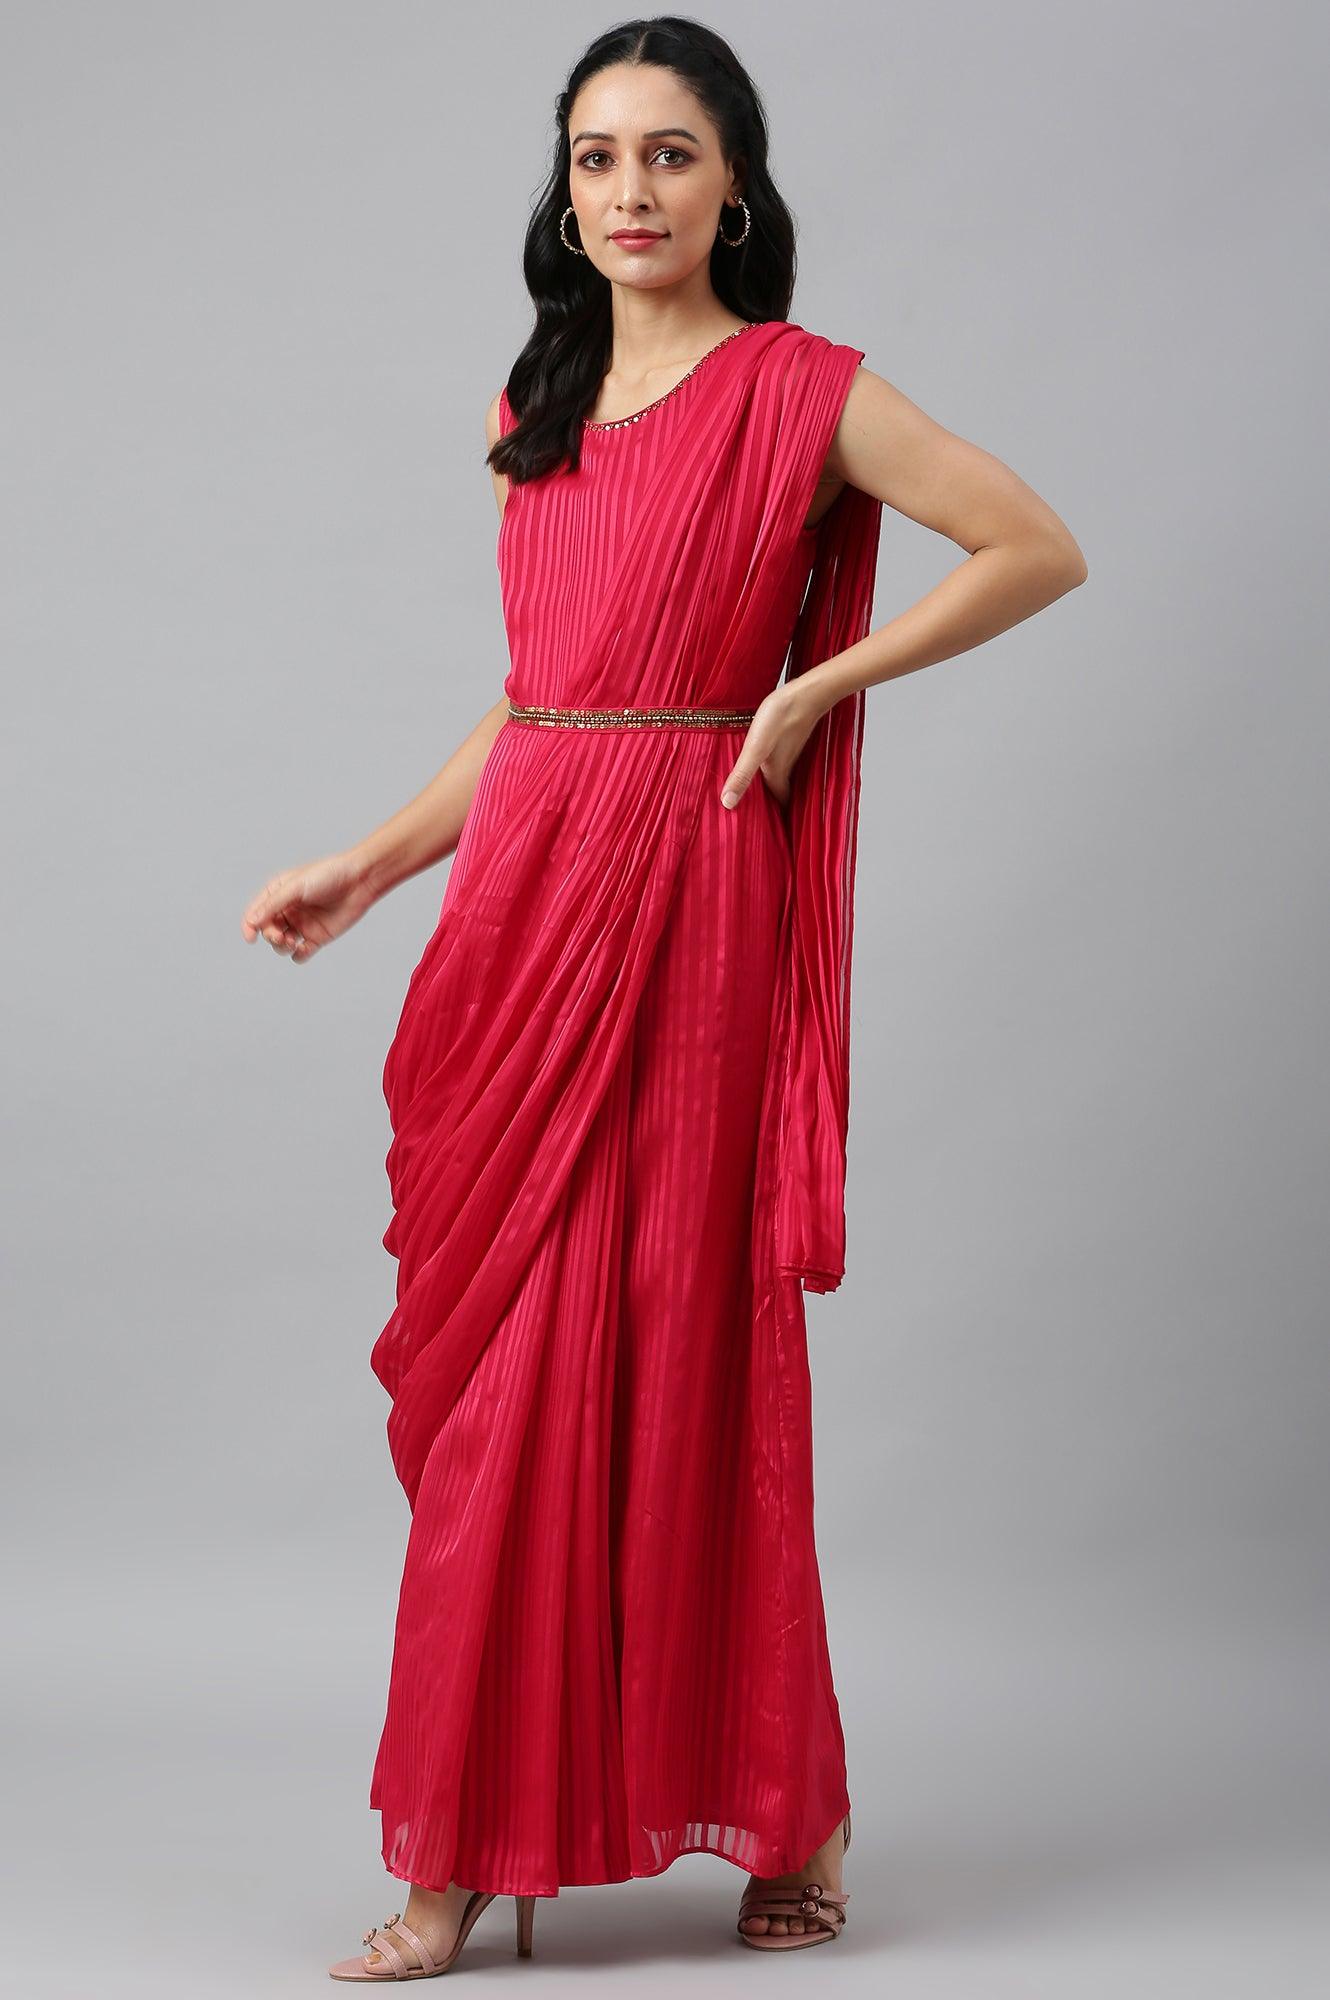 Coral Red Sleeveless Predrape Saree Dress With Belt And Tailored Jacket Set - wforwoman